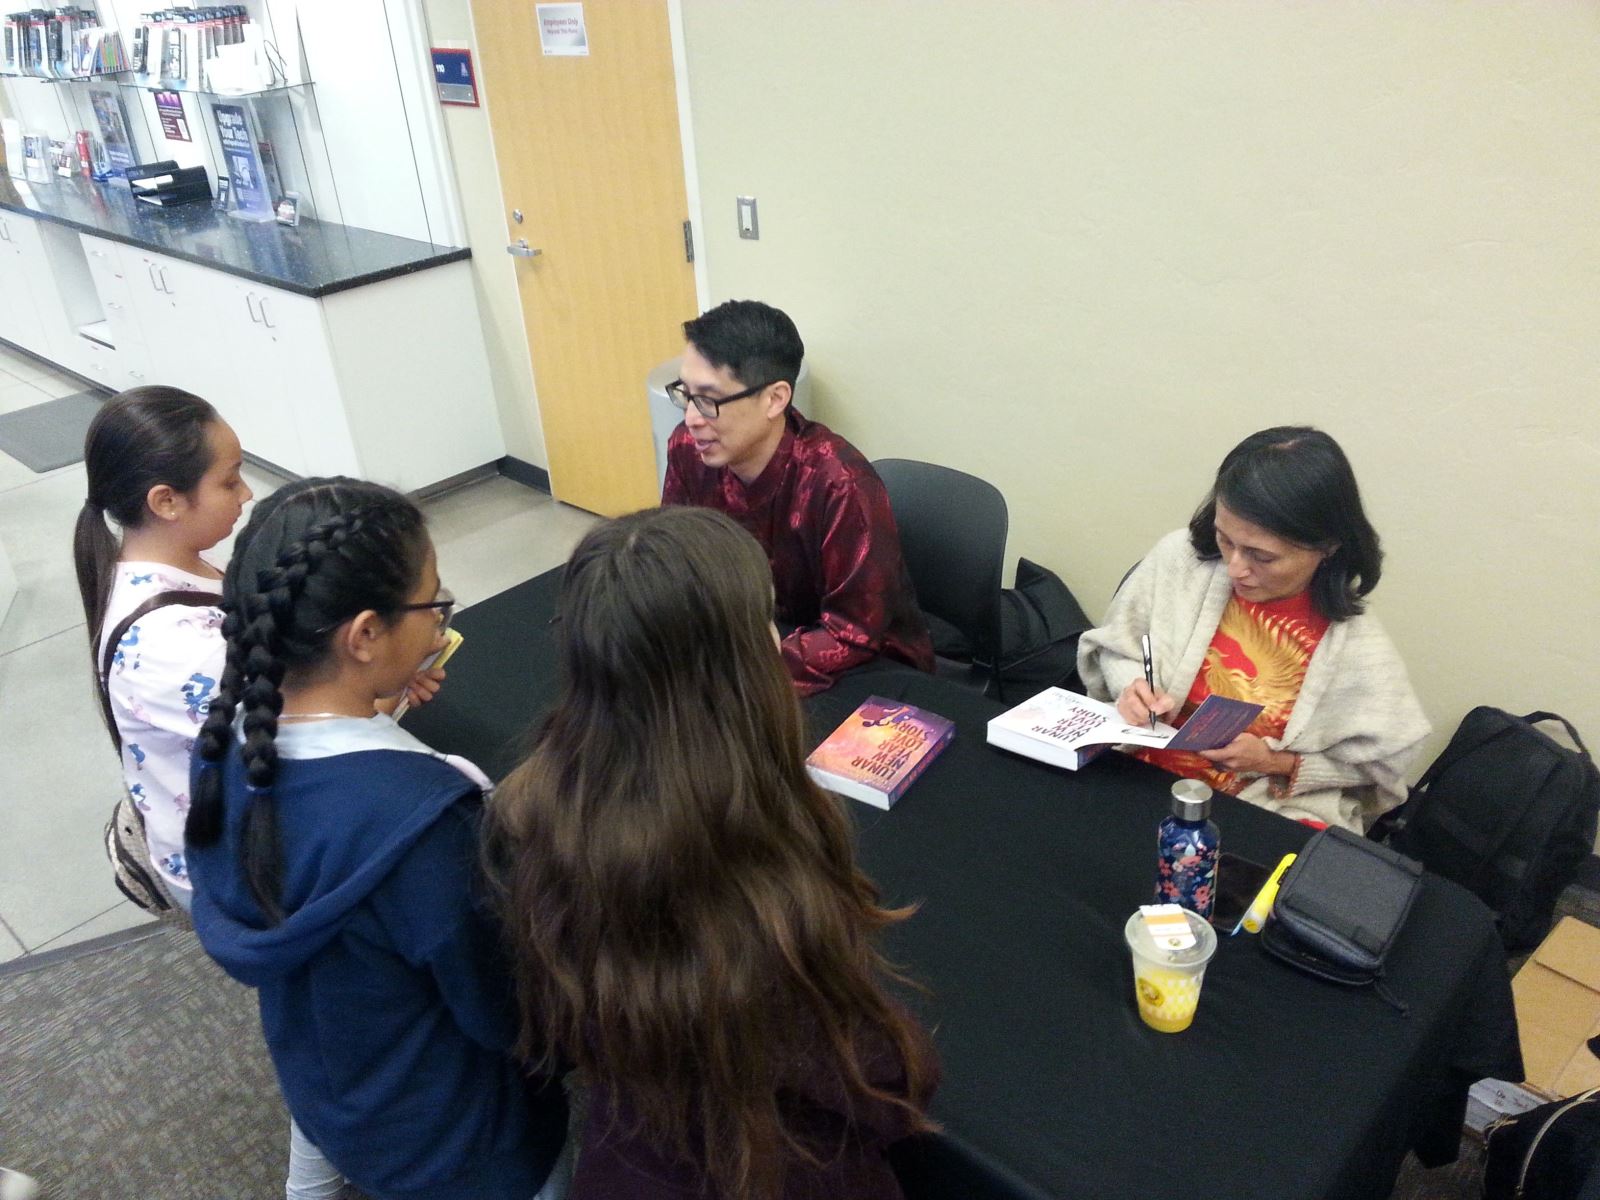 Students get their books signed at the Festival of Books